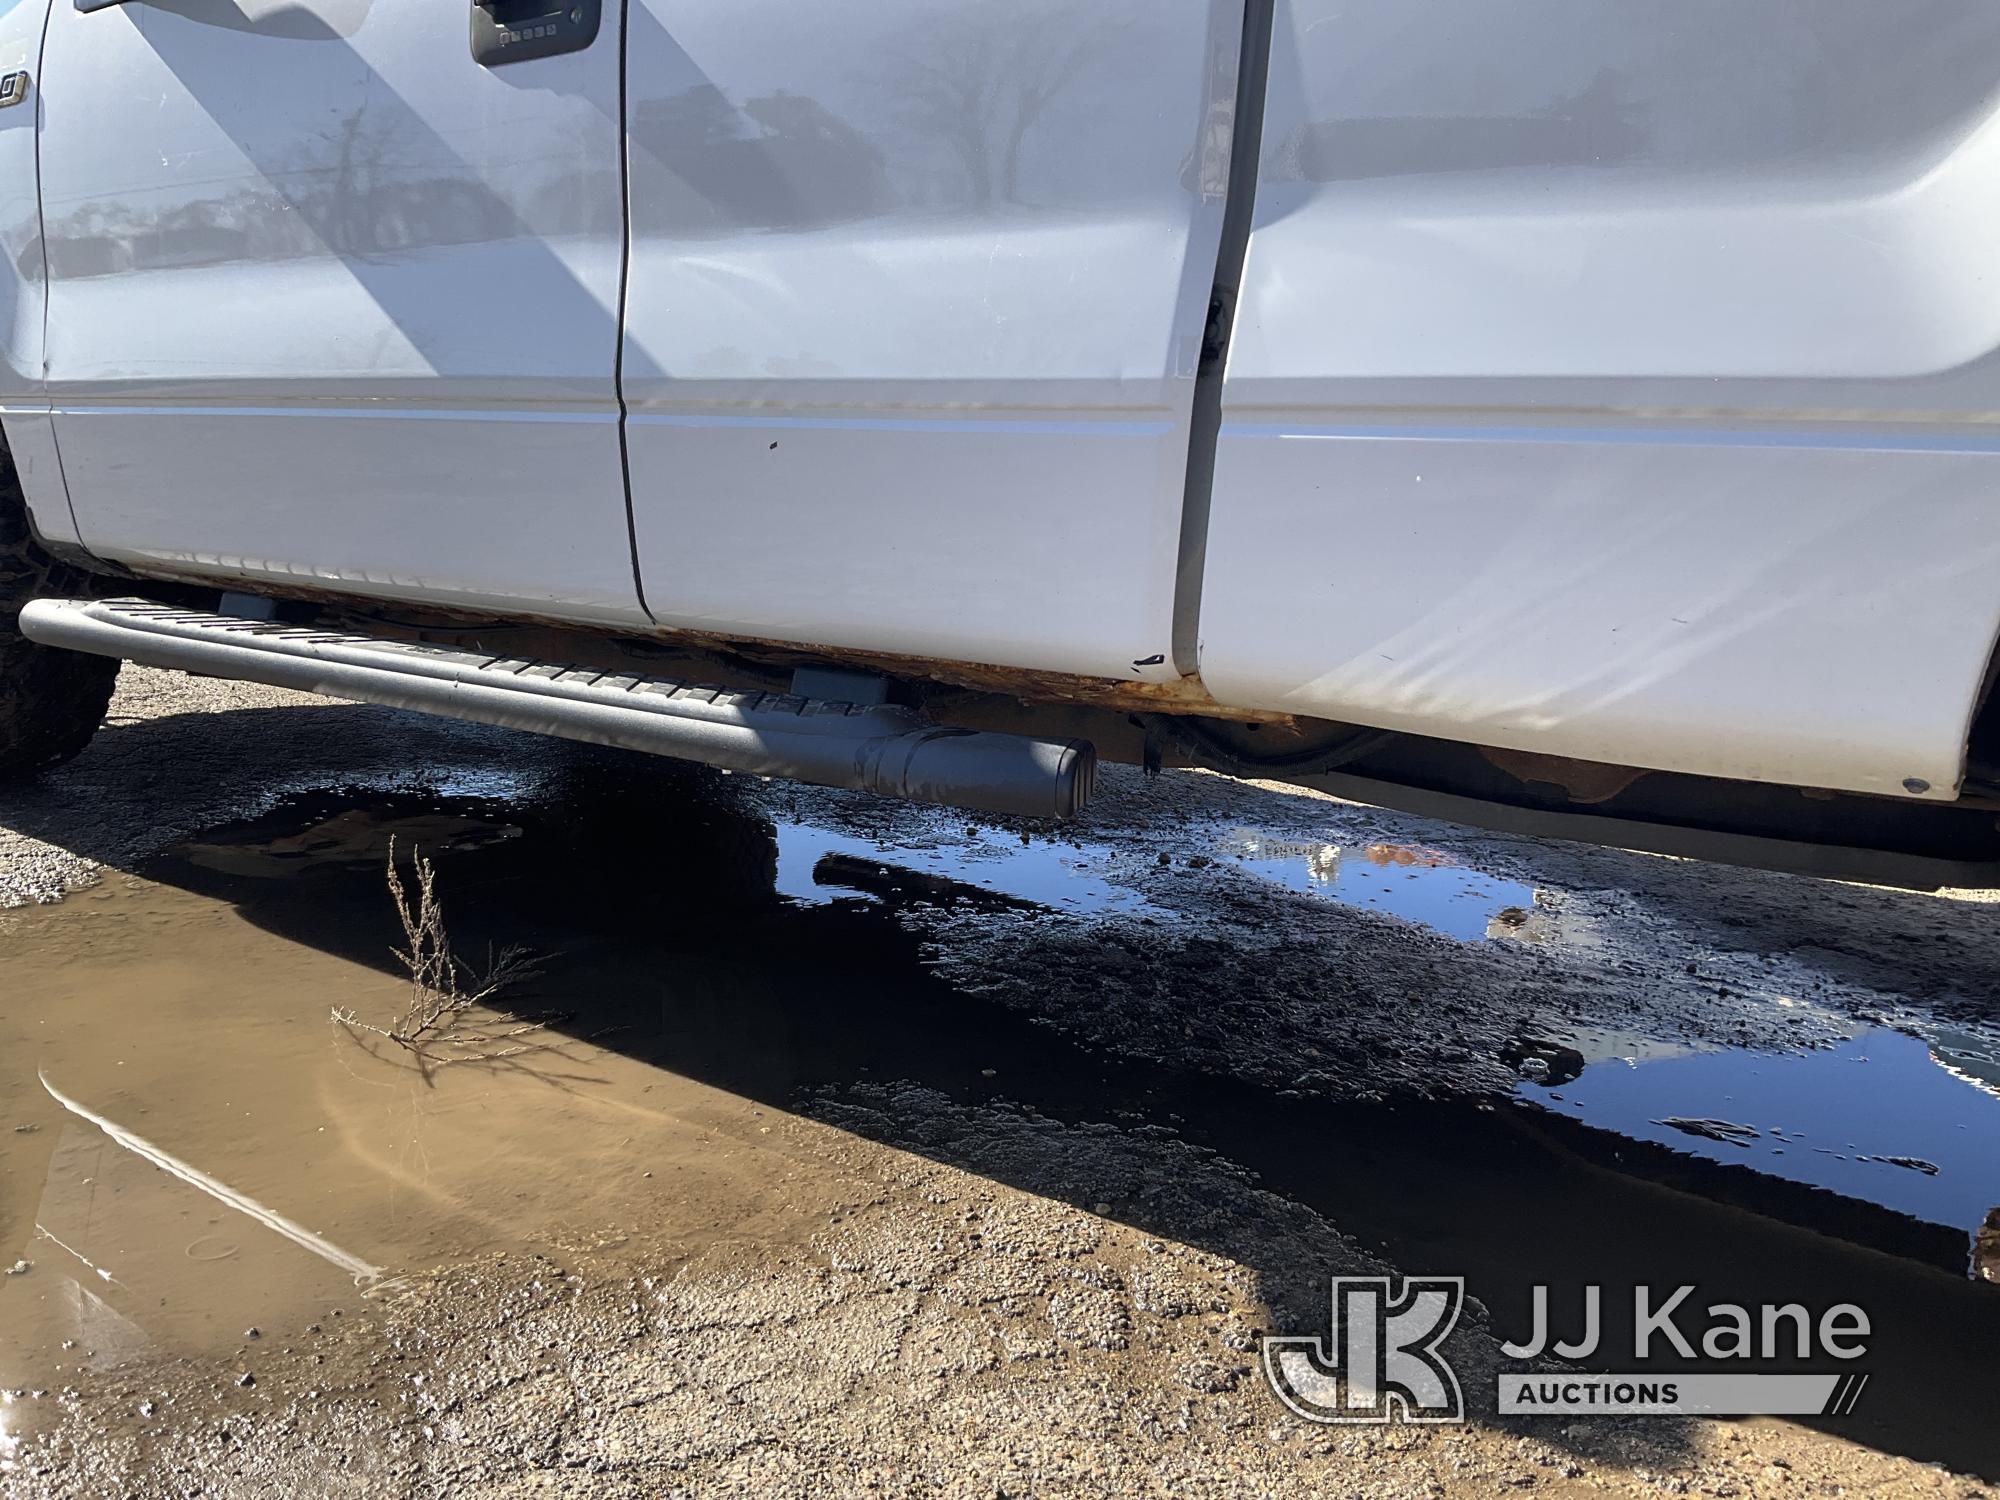 (South Beloit, IL) 2013 Ford F150 4x4 Extended-Cab Pickup Truck Runs & Moves) (Rust Damage, No Rear